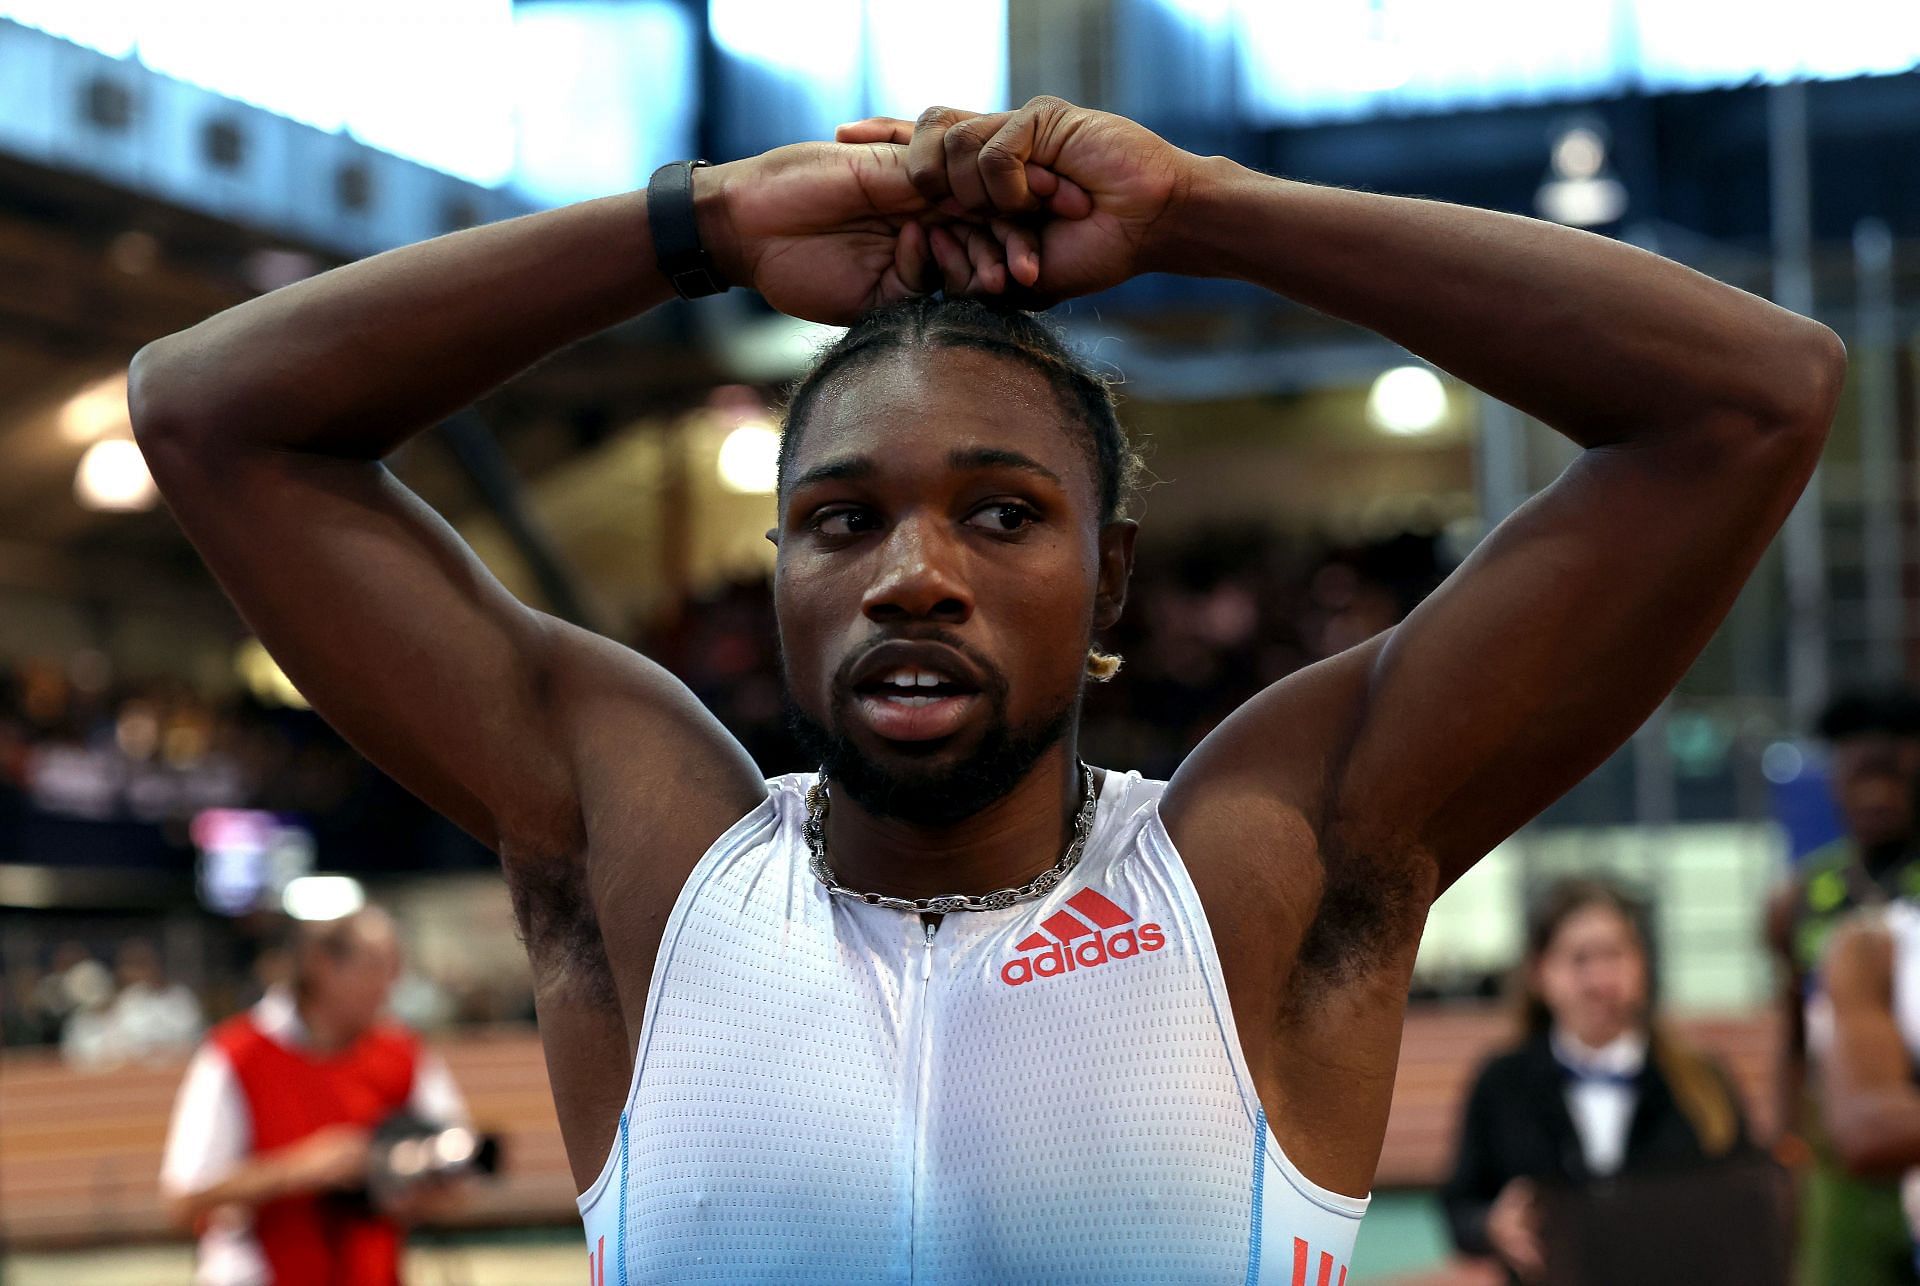 Noah Lyles at the 2023 USATF Indoor Championships